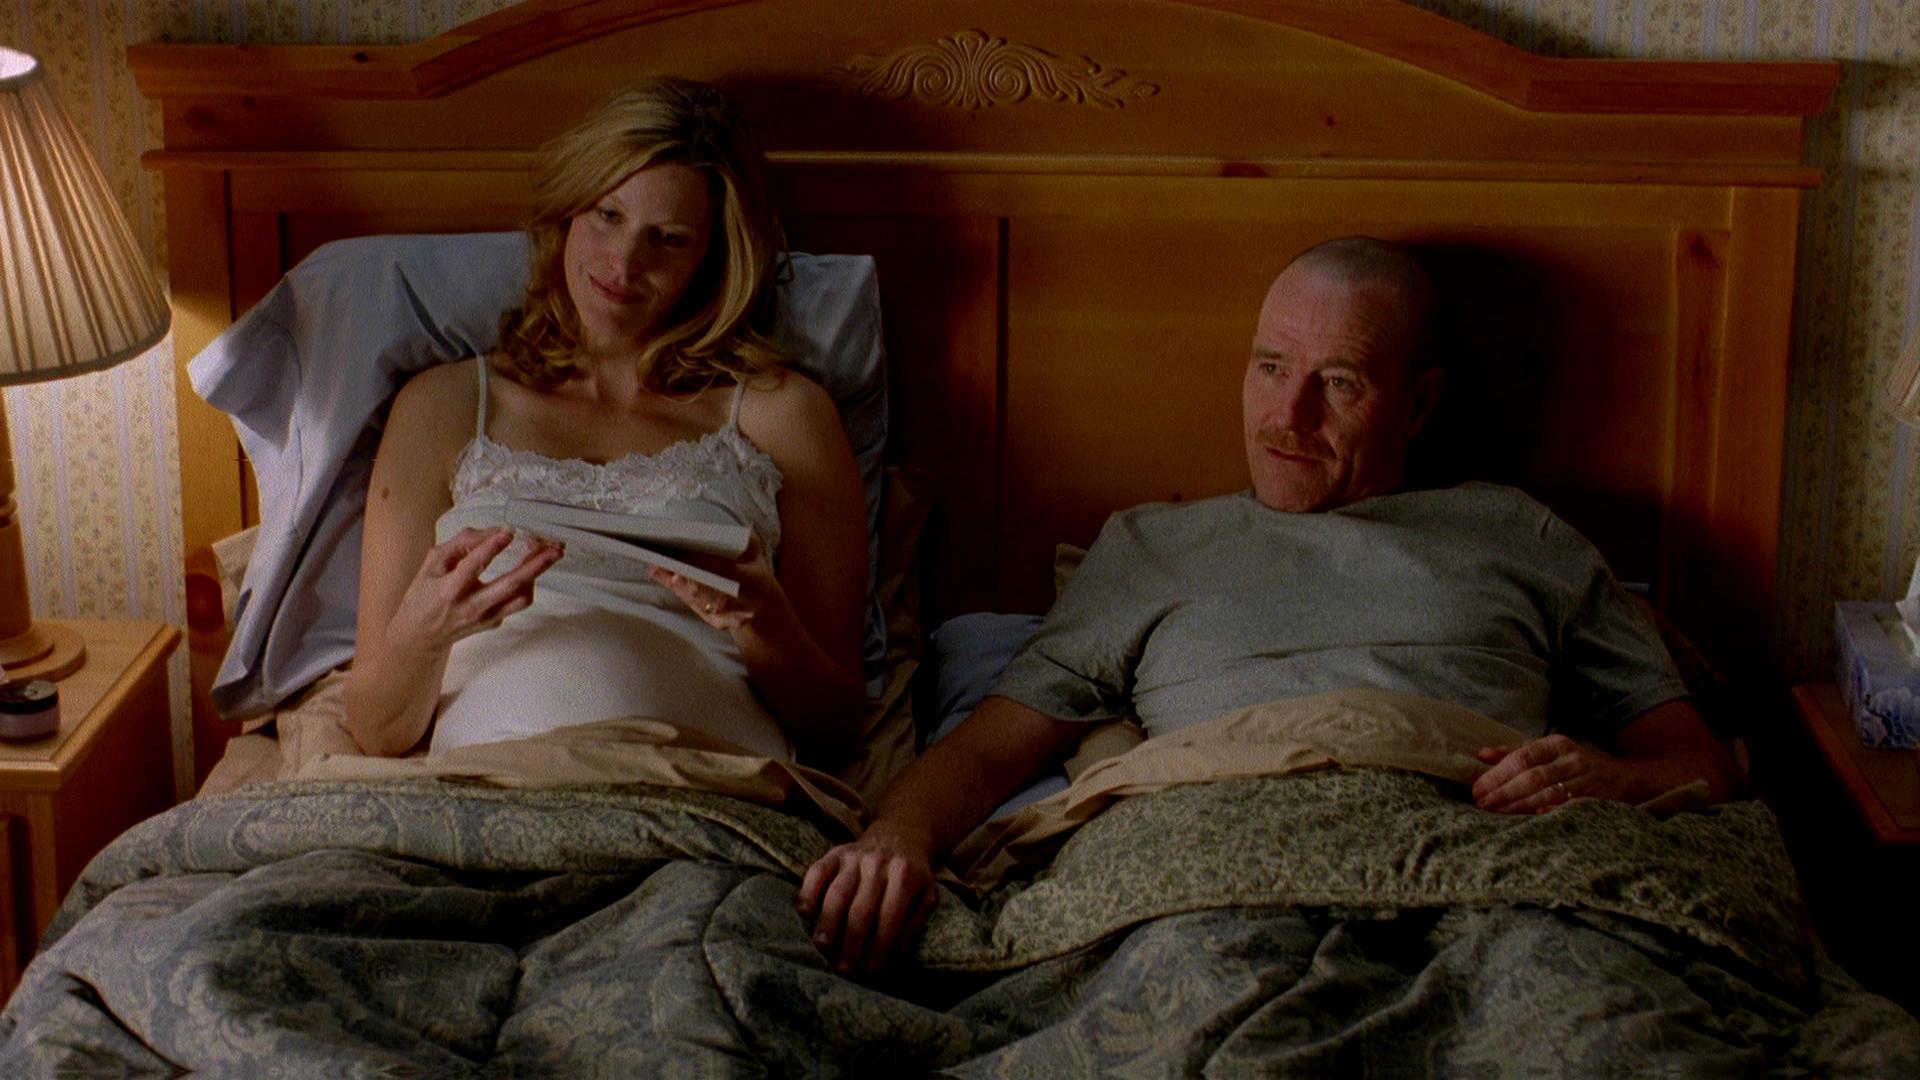 2x09 - 4 Days Out - 2094days 089 - Breaking Bad.